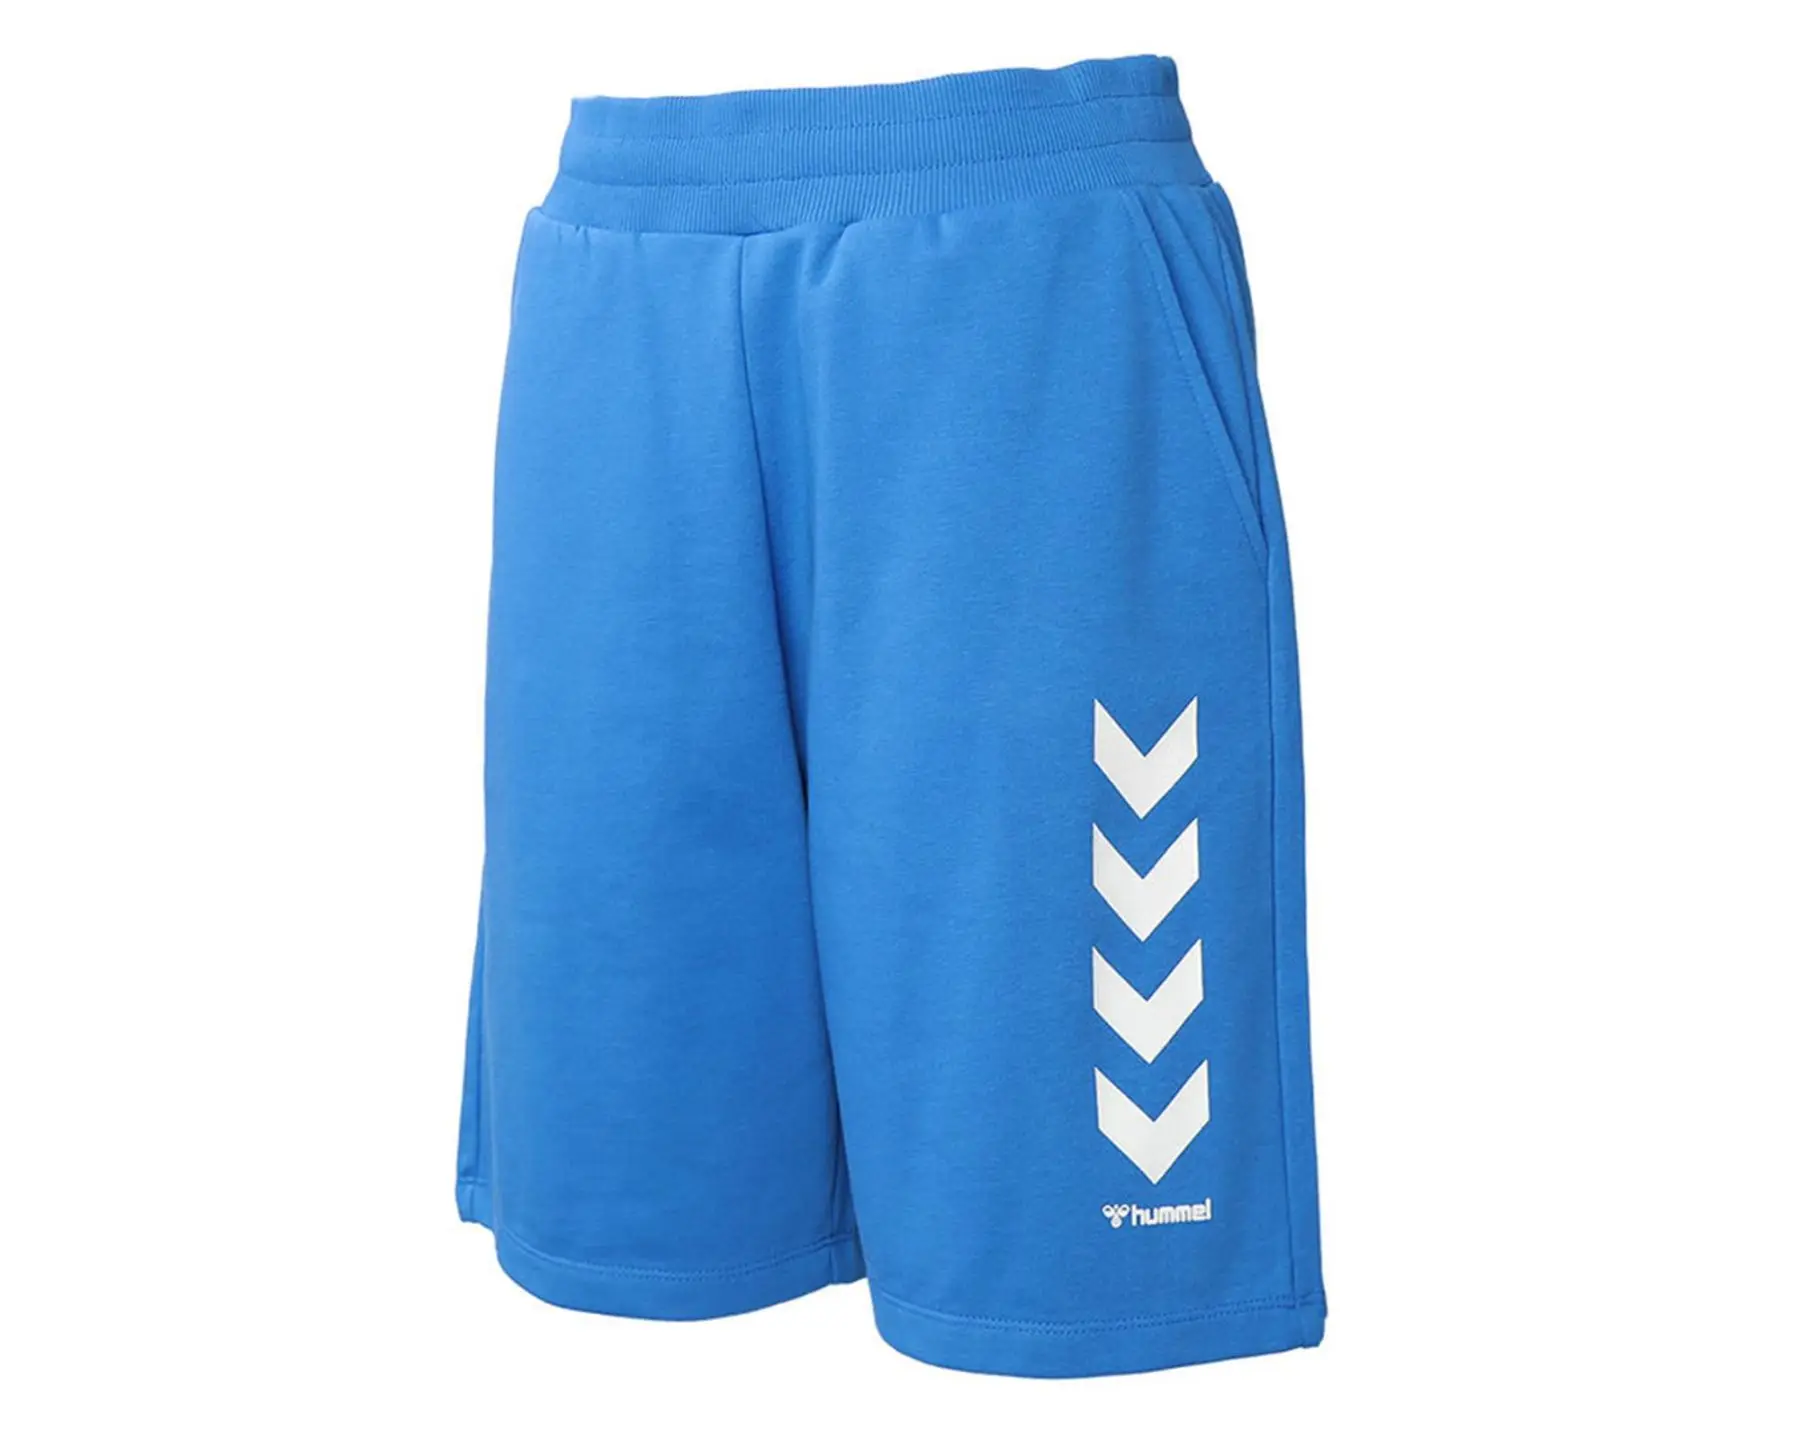 Hummel Original men's Casual Shorts Blue Color Comfortable Shorts for Sporty and Comfortable Walking Elastic Waist Structure